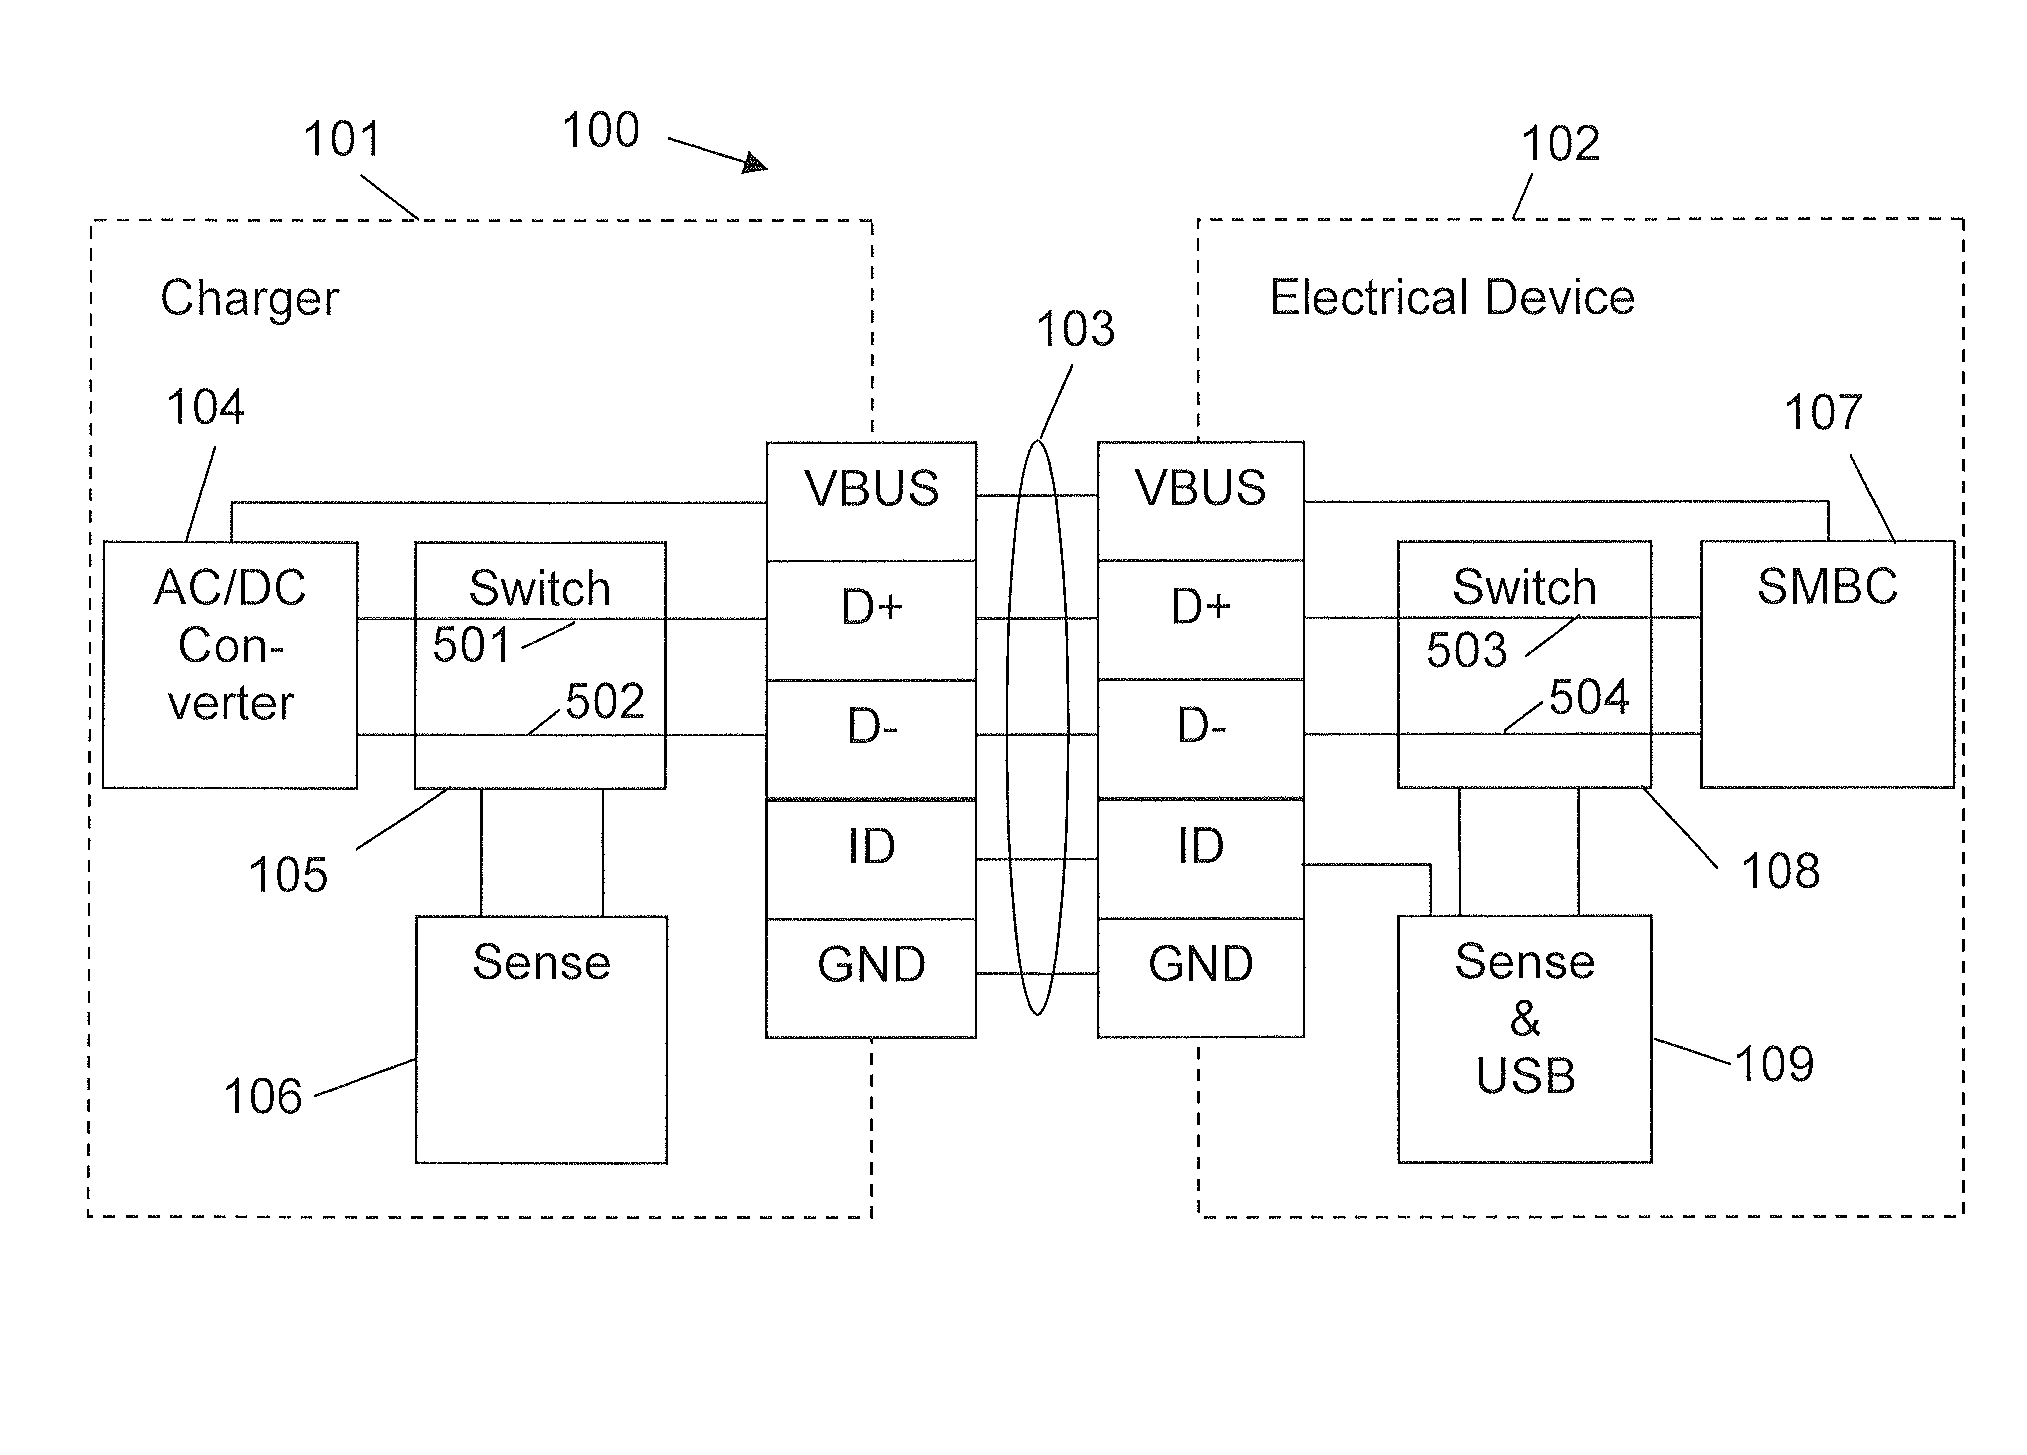 Charging an electrical device via a data interface